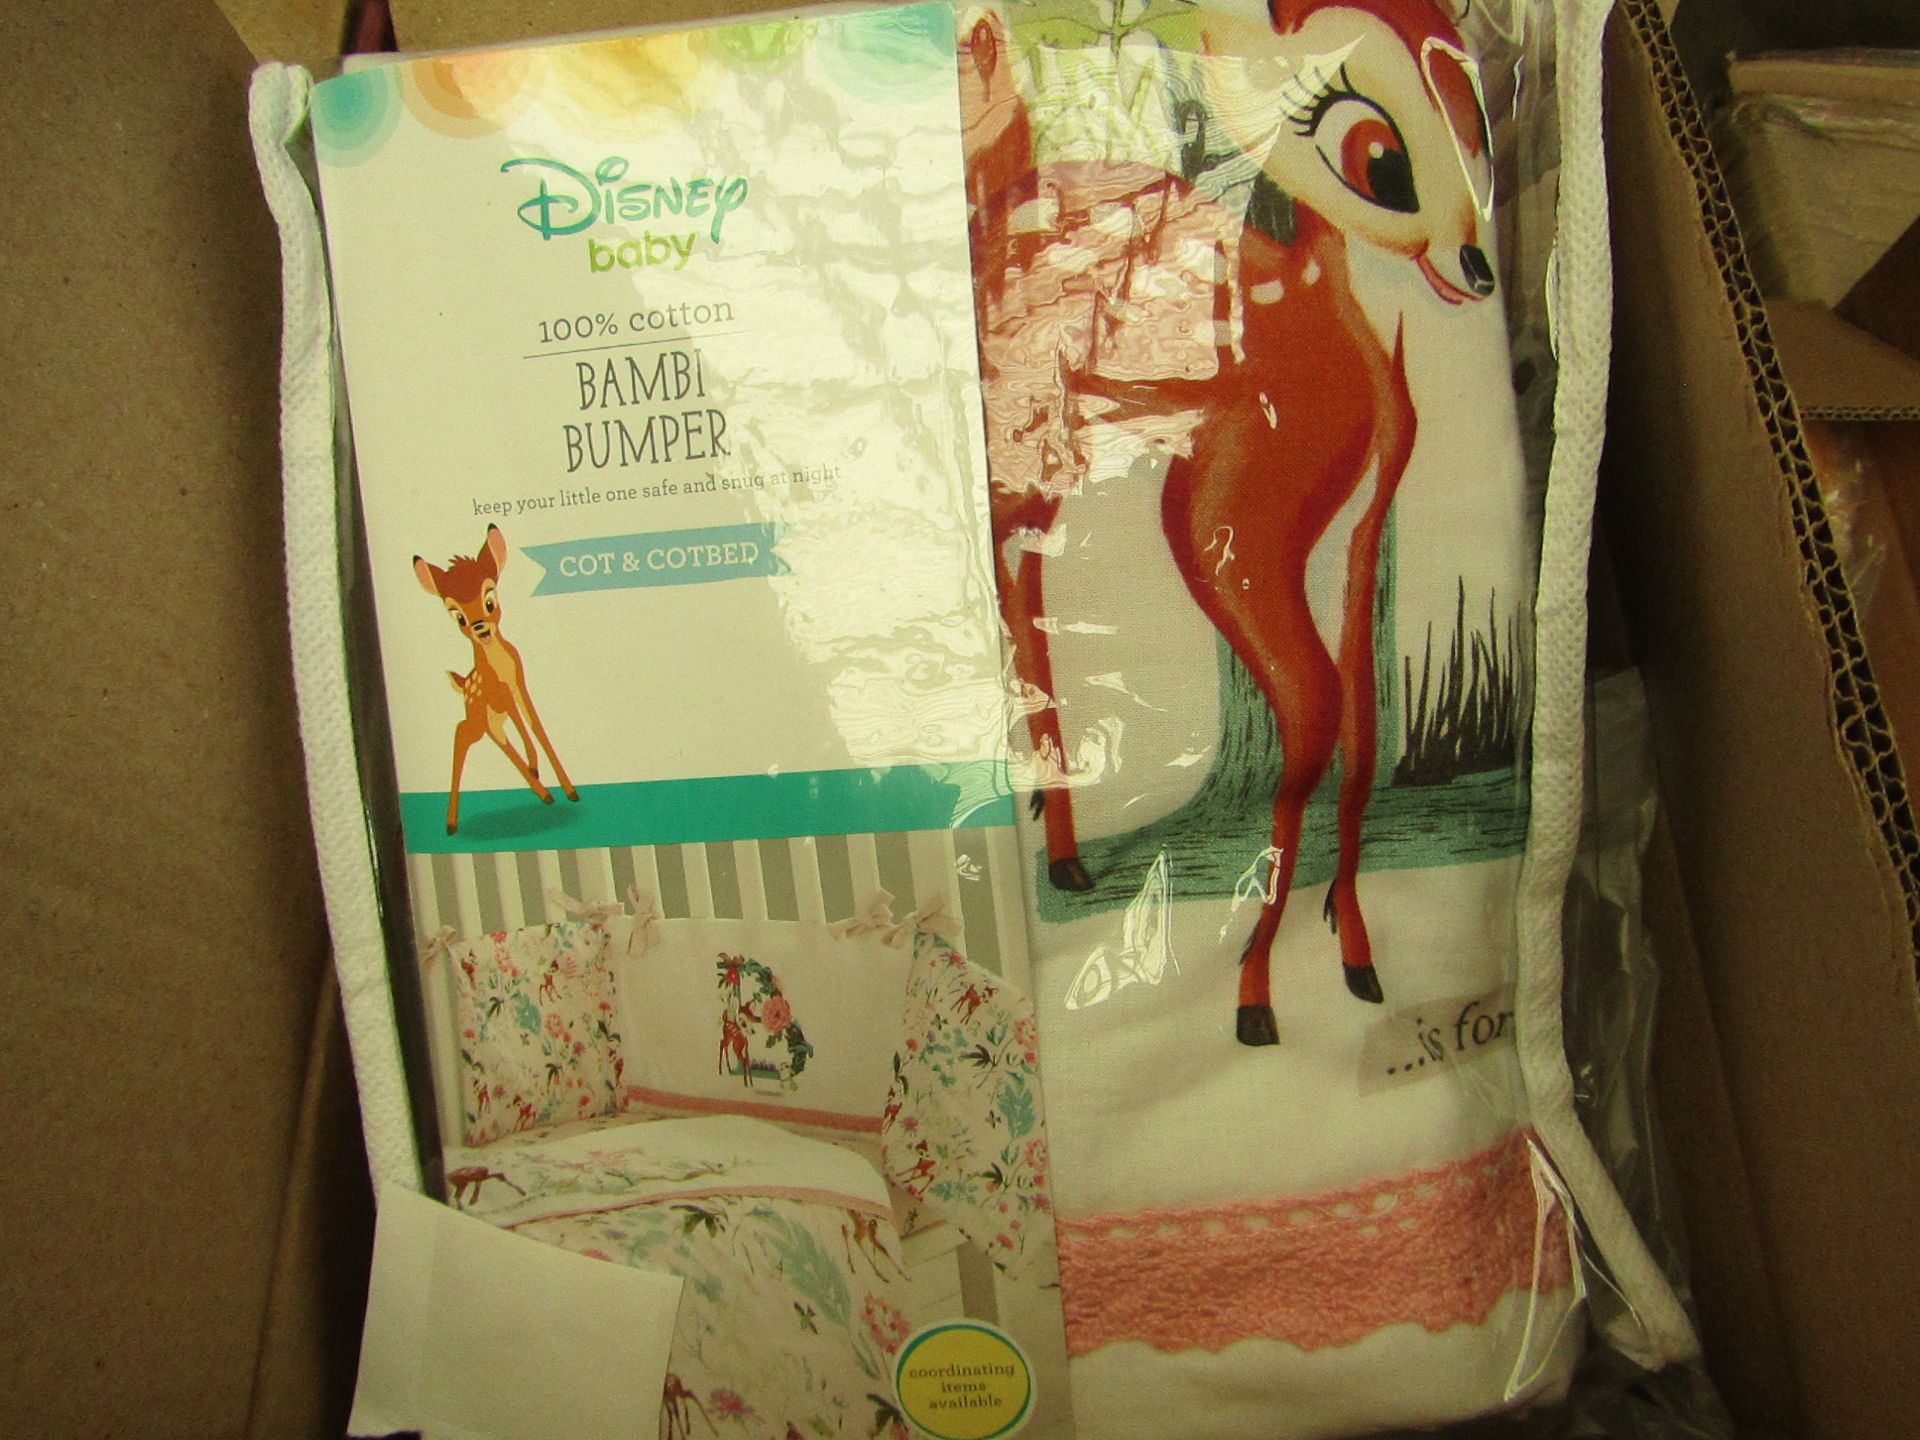 Disney Baby - Bambi Bumper (Cot & Cotbed) - All New & Packaged.